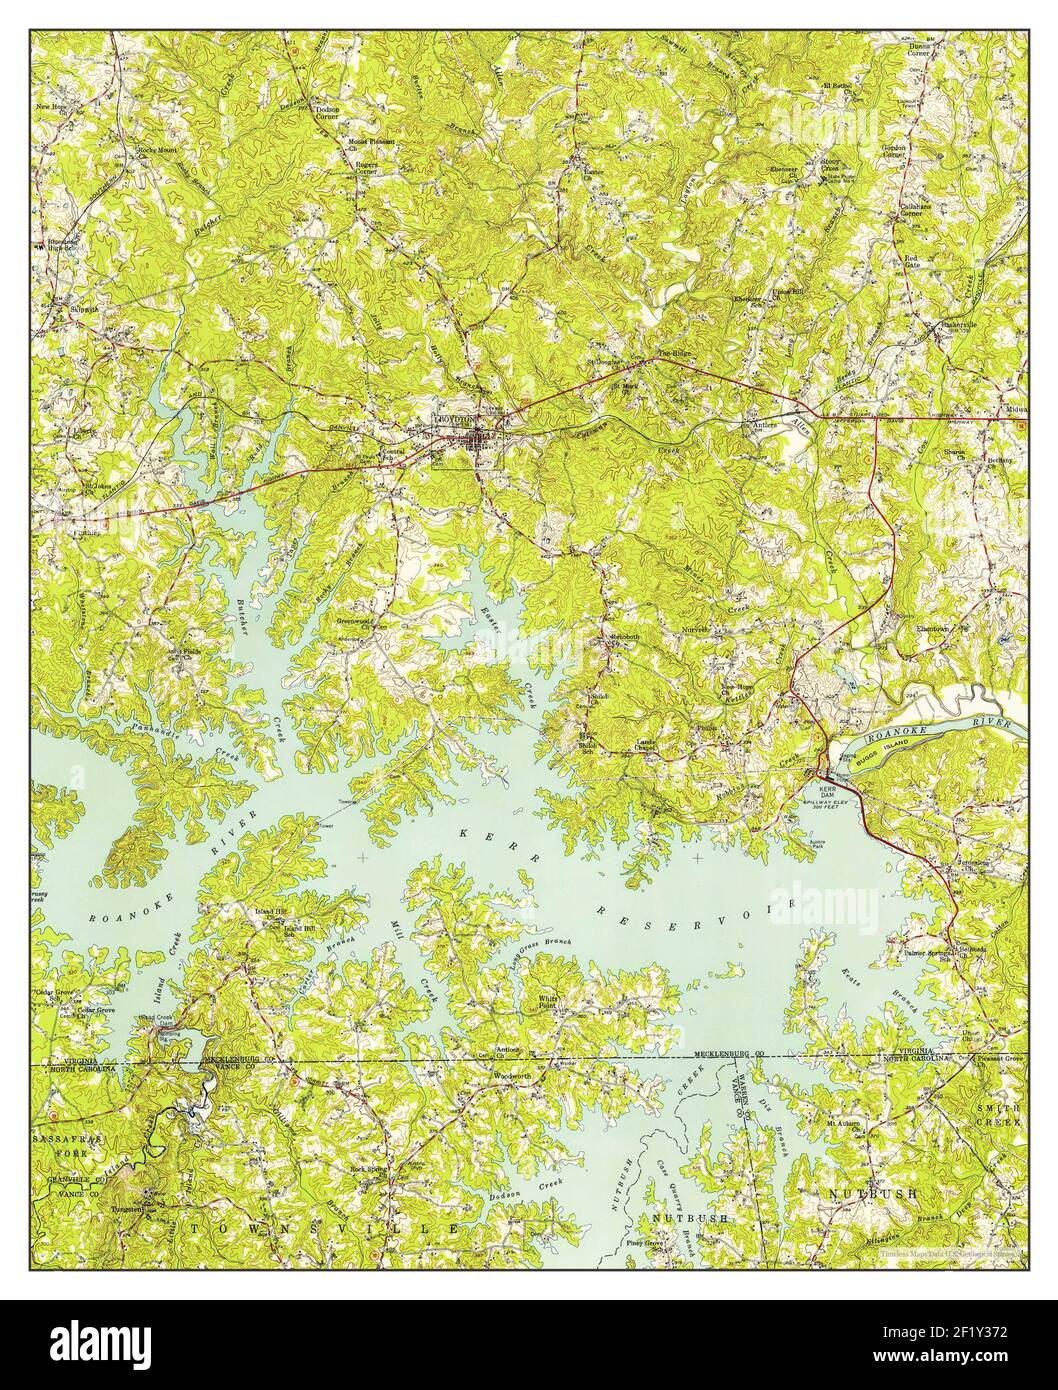 Boydton, Virginia, map 1955, 1:62500, United States of America by Timeless Maps, data U.S. Geological Survey Stock Photo